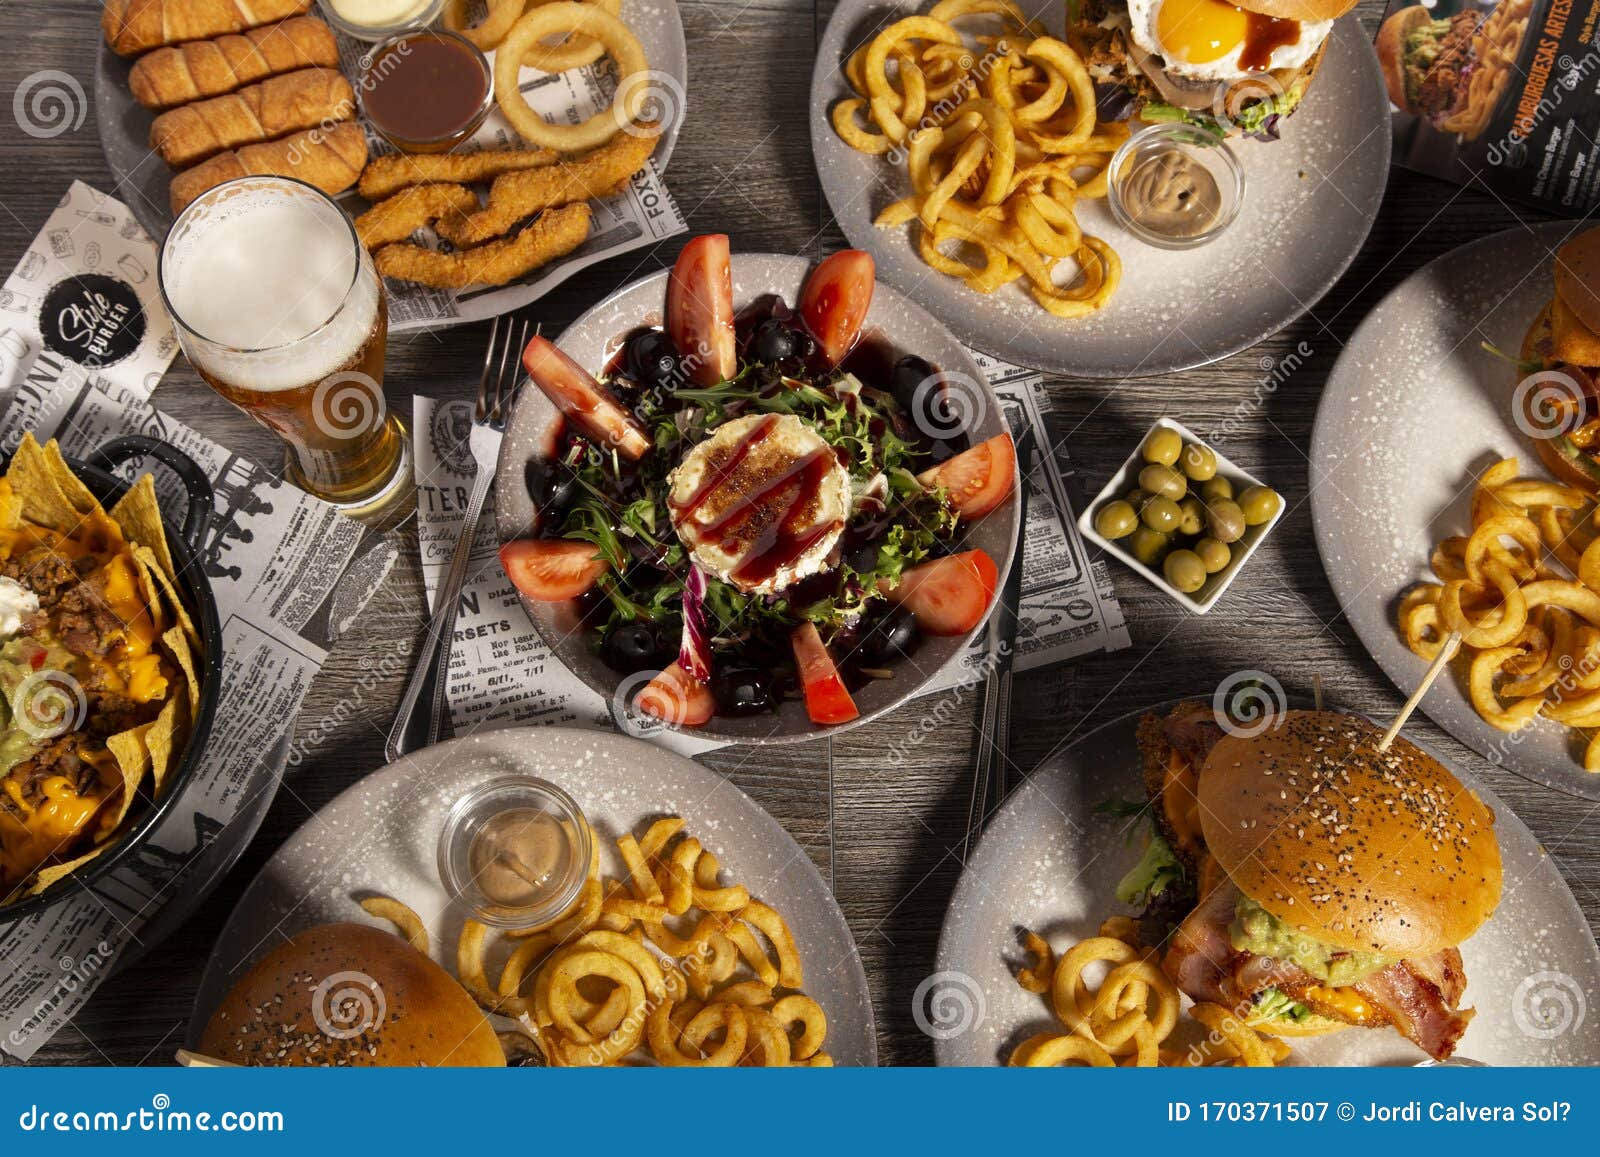 Assorted Hamburger Dishes and Tapas on Wooden Table Seen Above. Isolated Image - Image fast, hamburger: 170371507